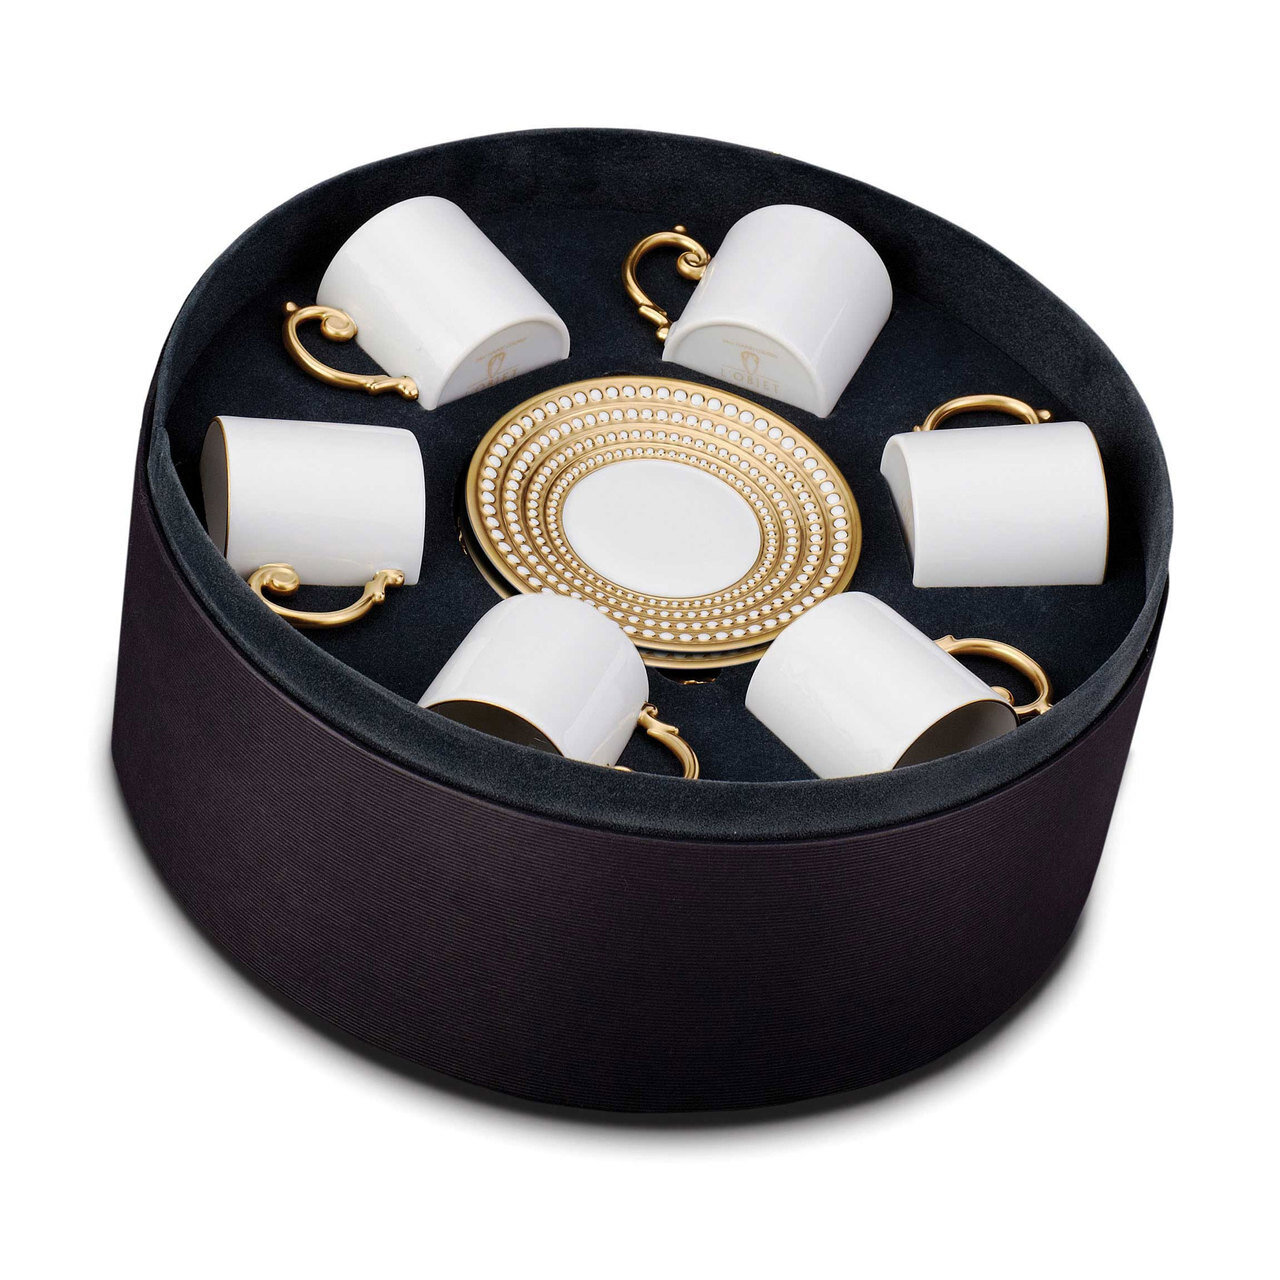 L'Objet Perlee Espresso Cup and Saucer Gift Box of 6 Gold